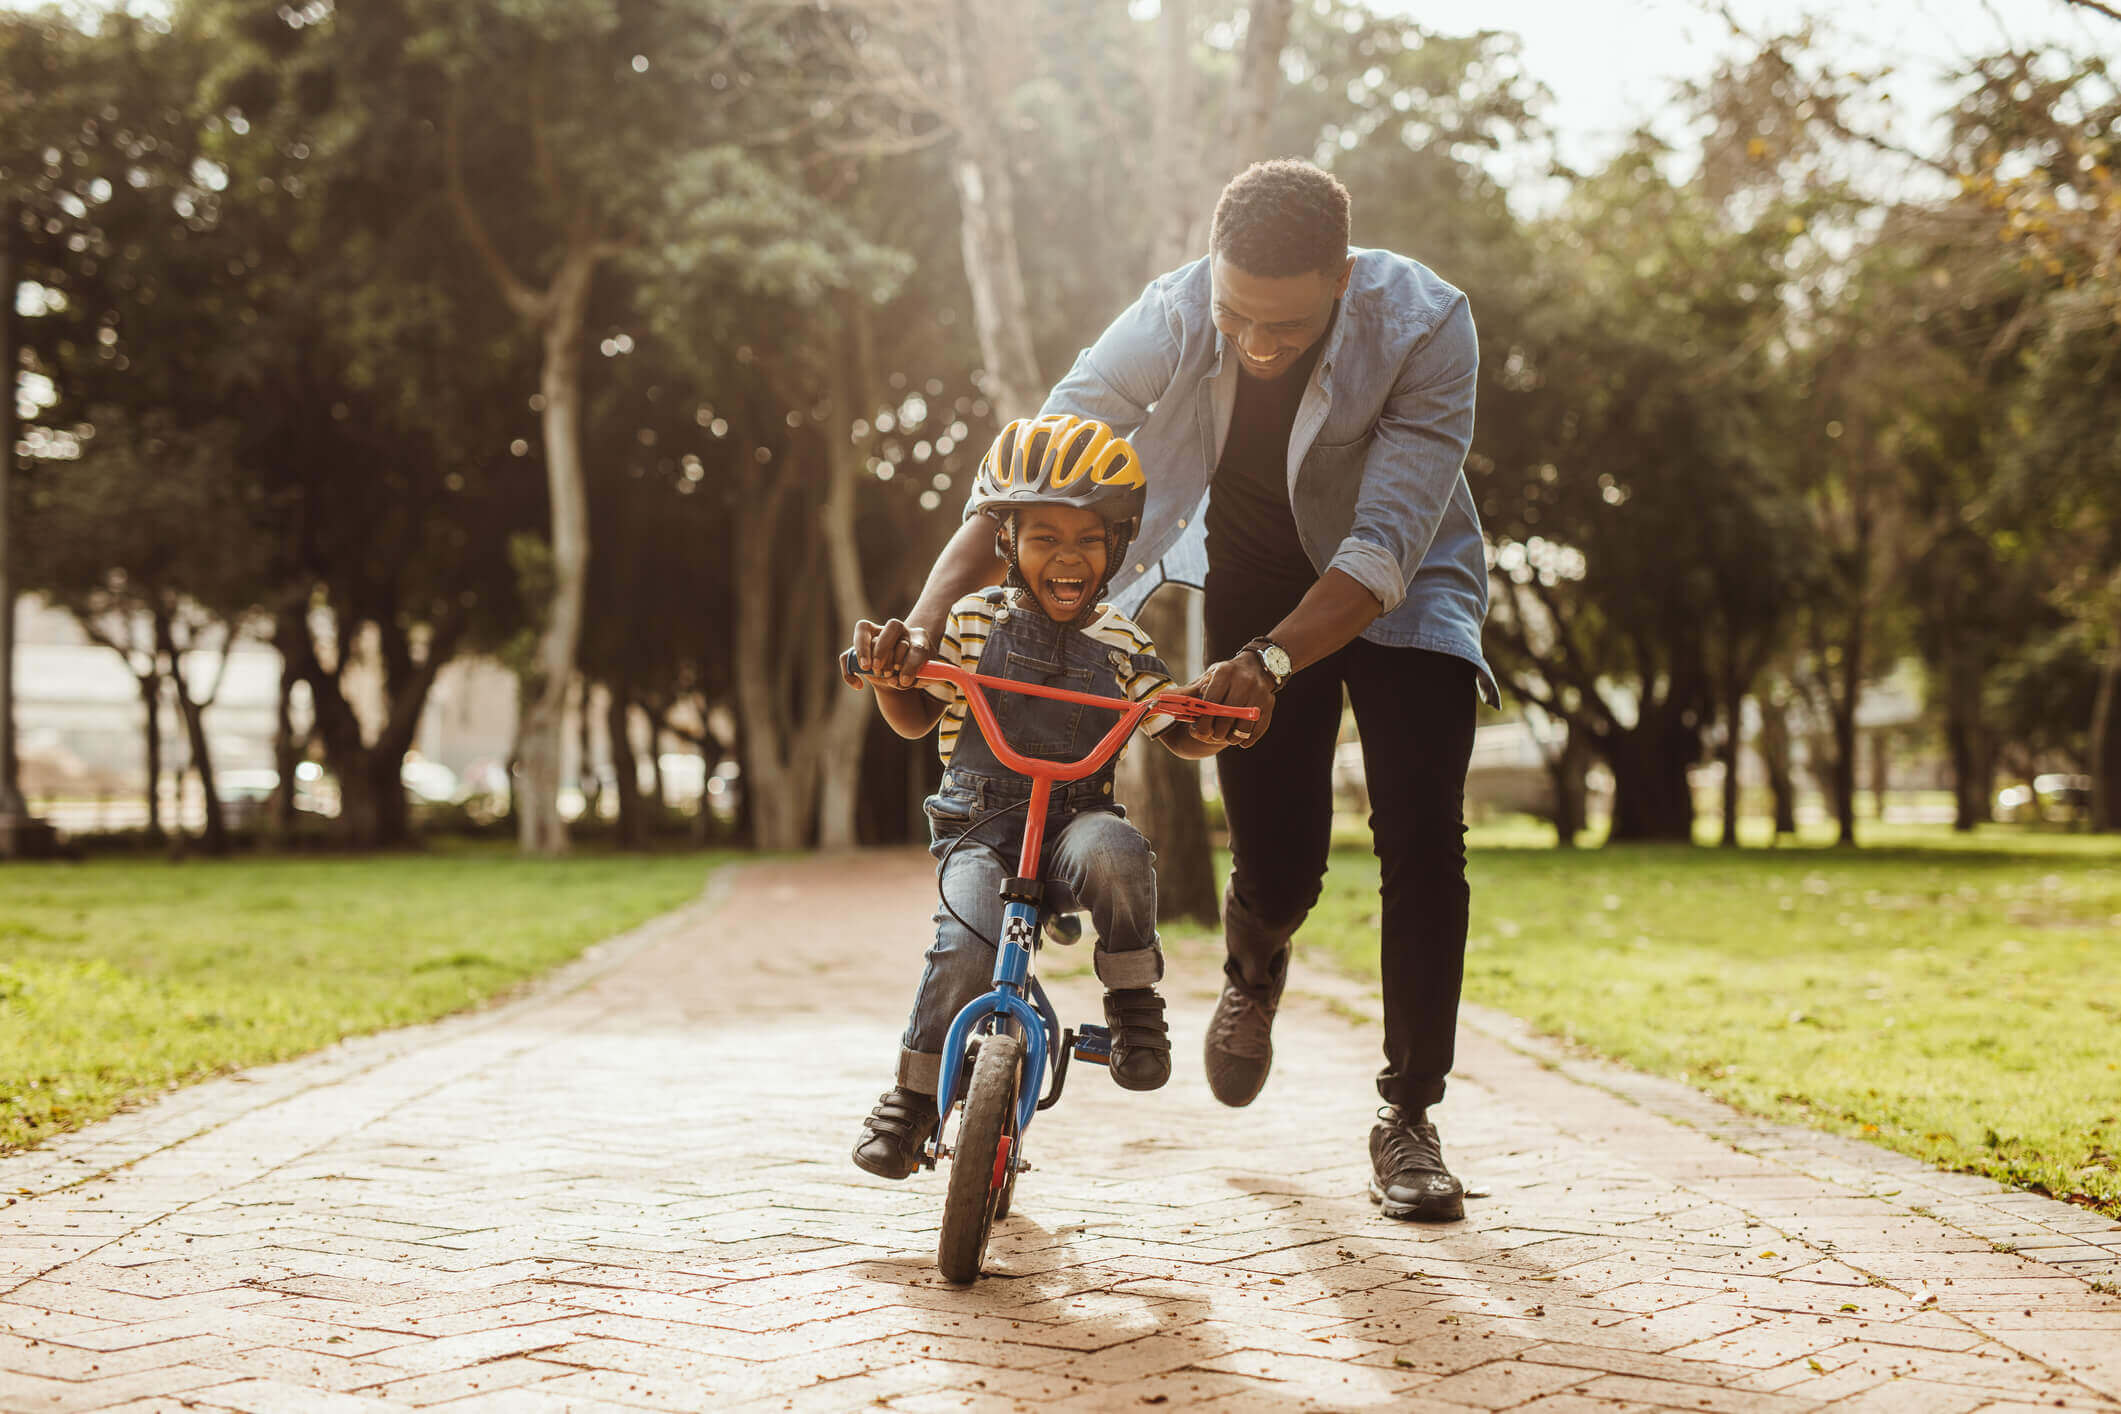 Man is pushing his son on a bike, teaching him to ride without training wheels.